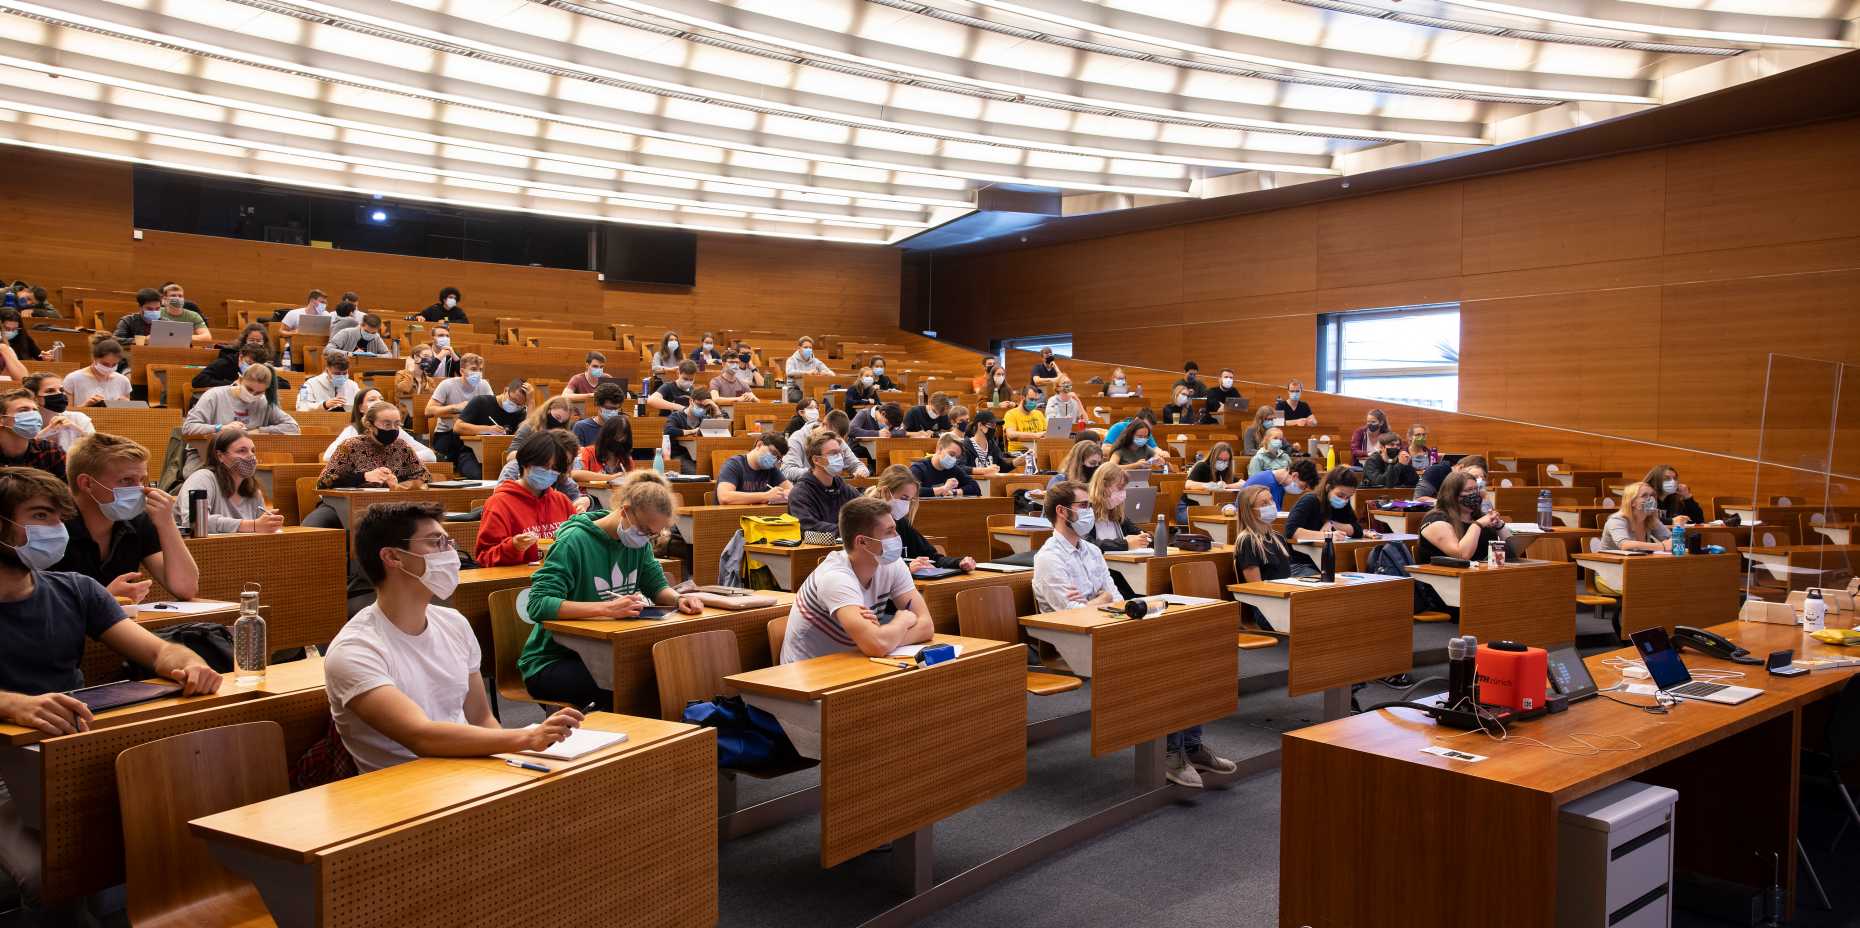 Corona safety concept lecture hall 